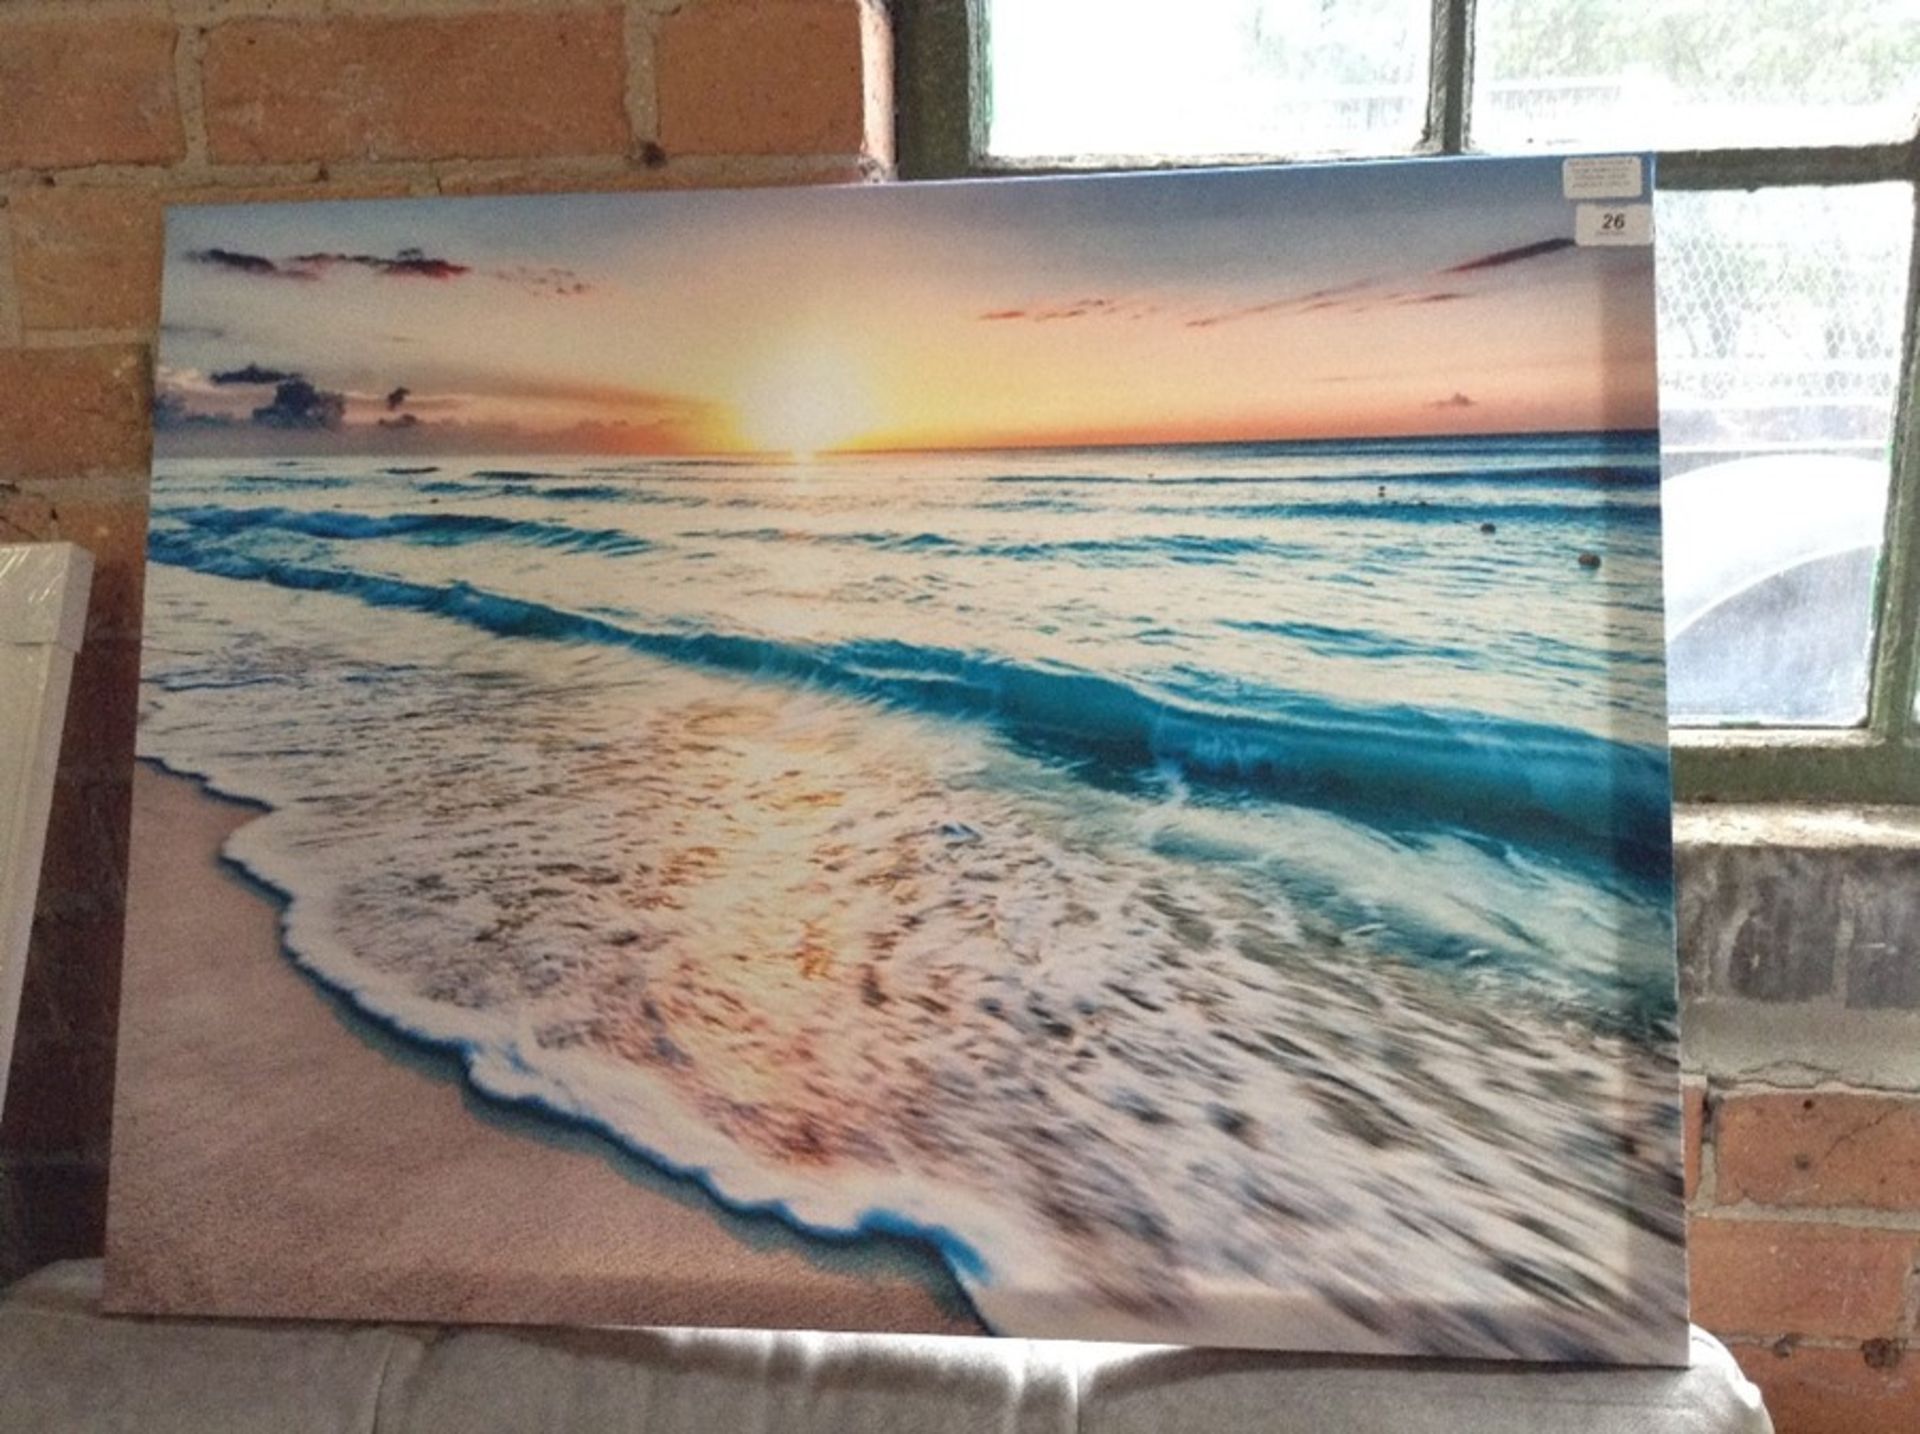 East Urban Home,Sea at Sunset Graphic Art on Canvas RRP -£49.99 (EXXP1873 -15741/3)